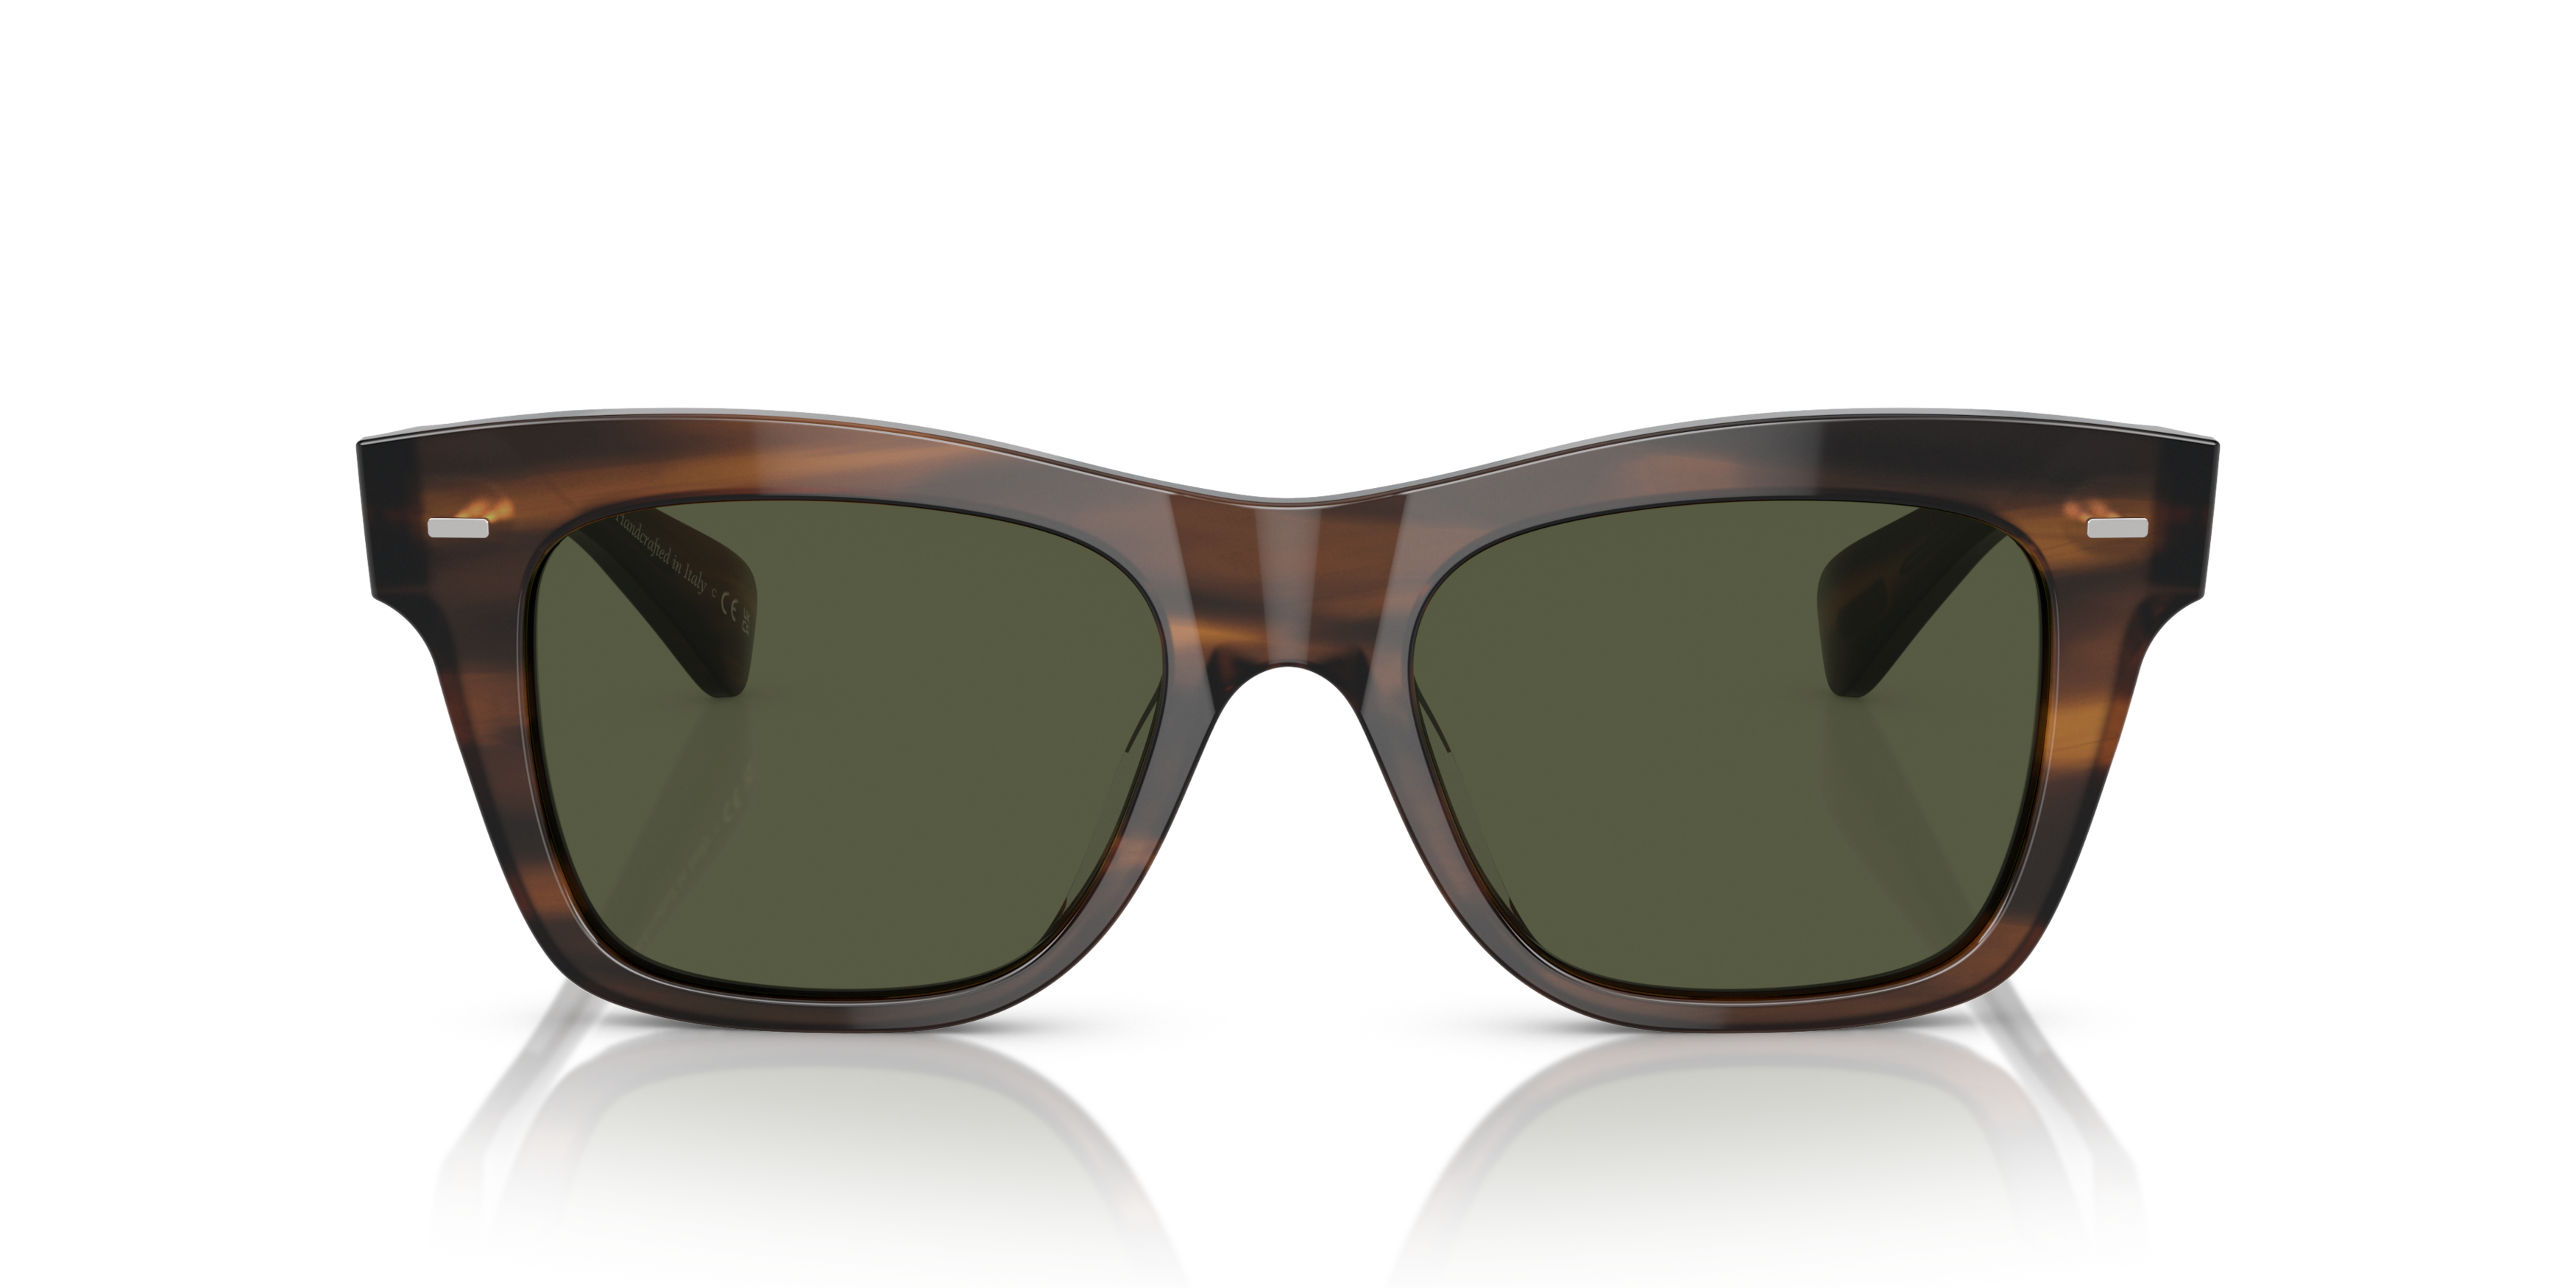 [products.image.front] OLIVER PEOPLES OV5542SU 172452